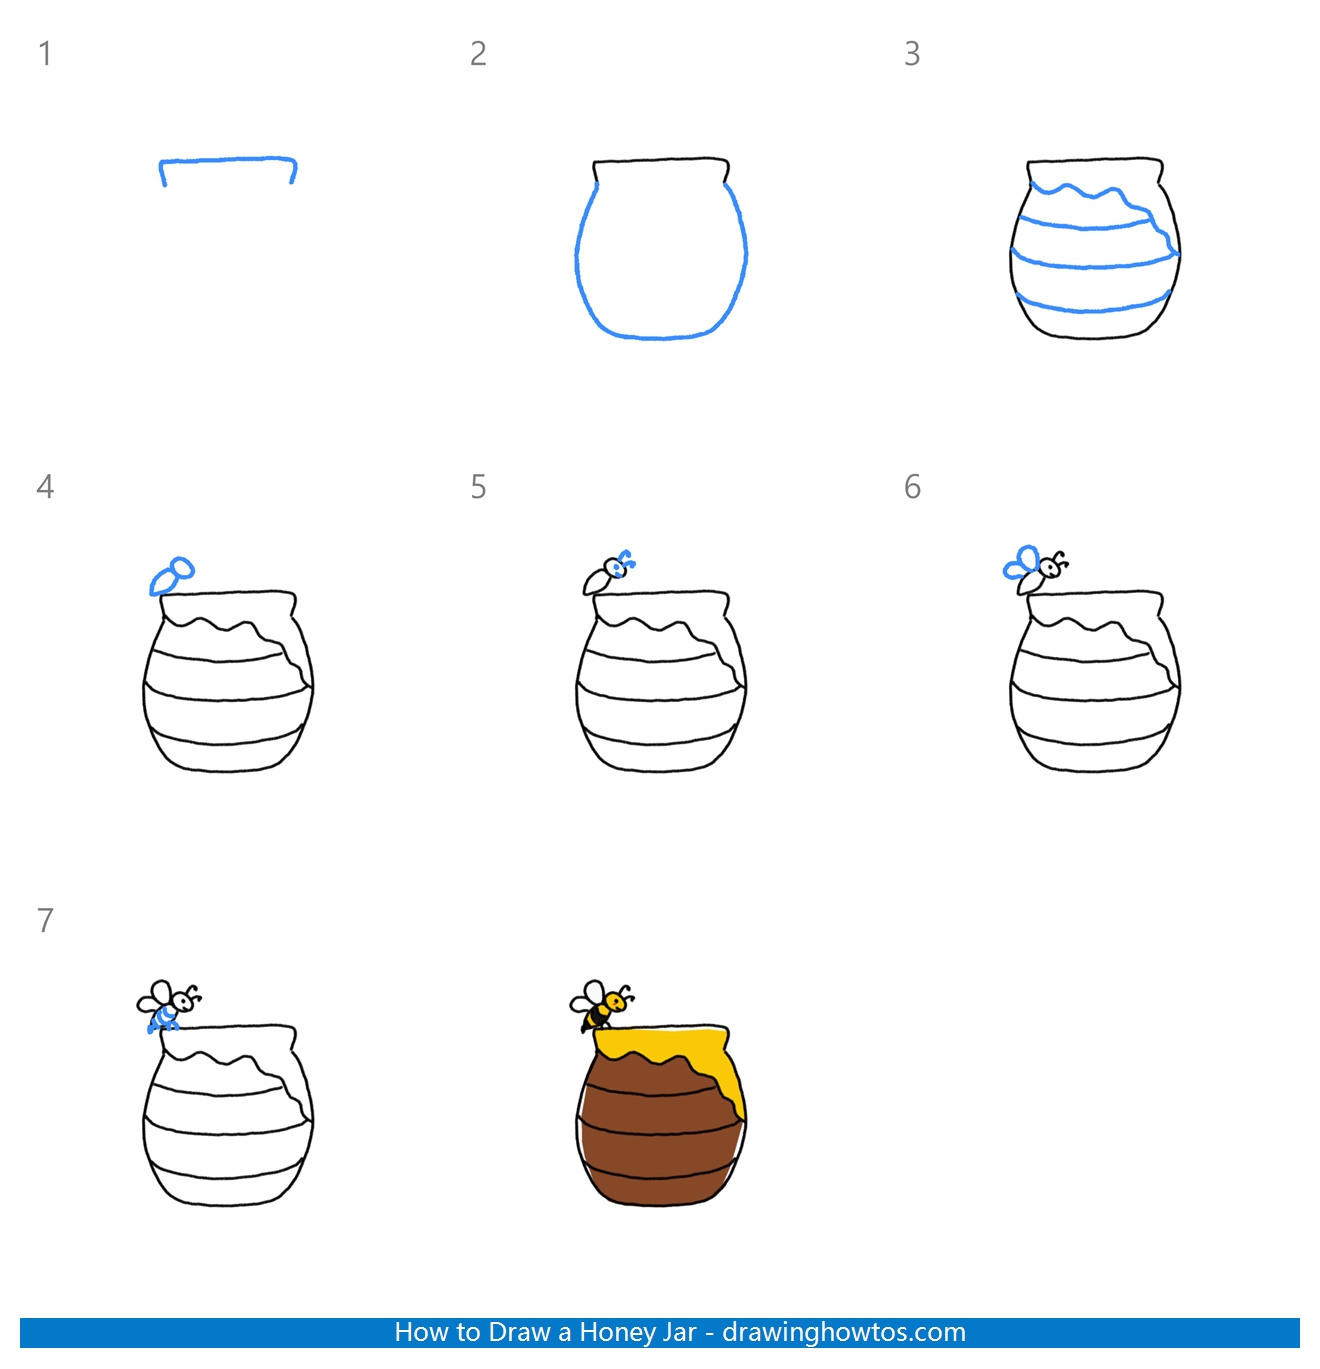 How to Draw a Honey Jar Step by Step